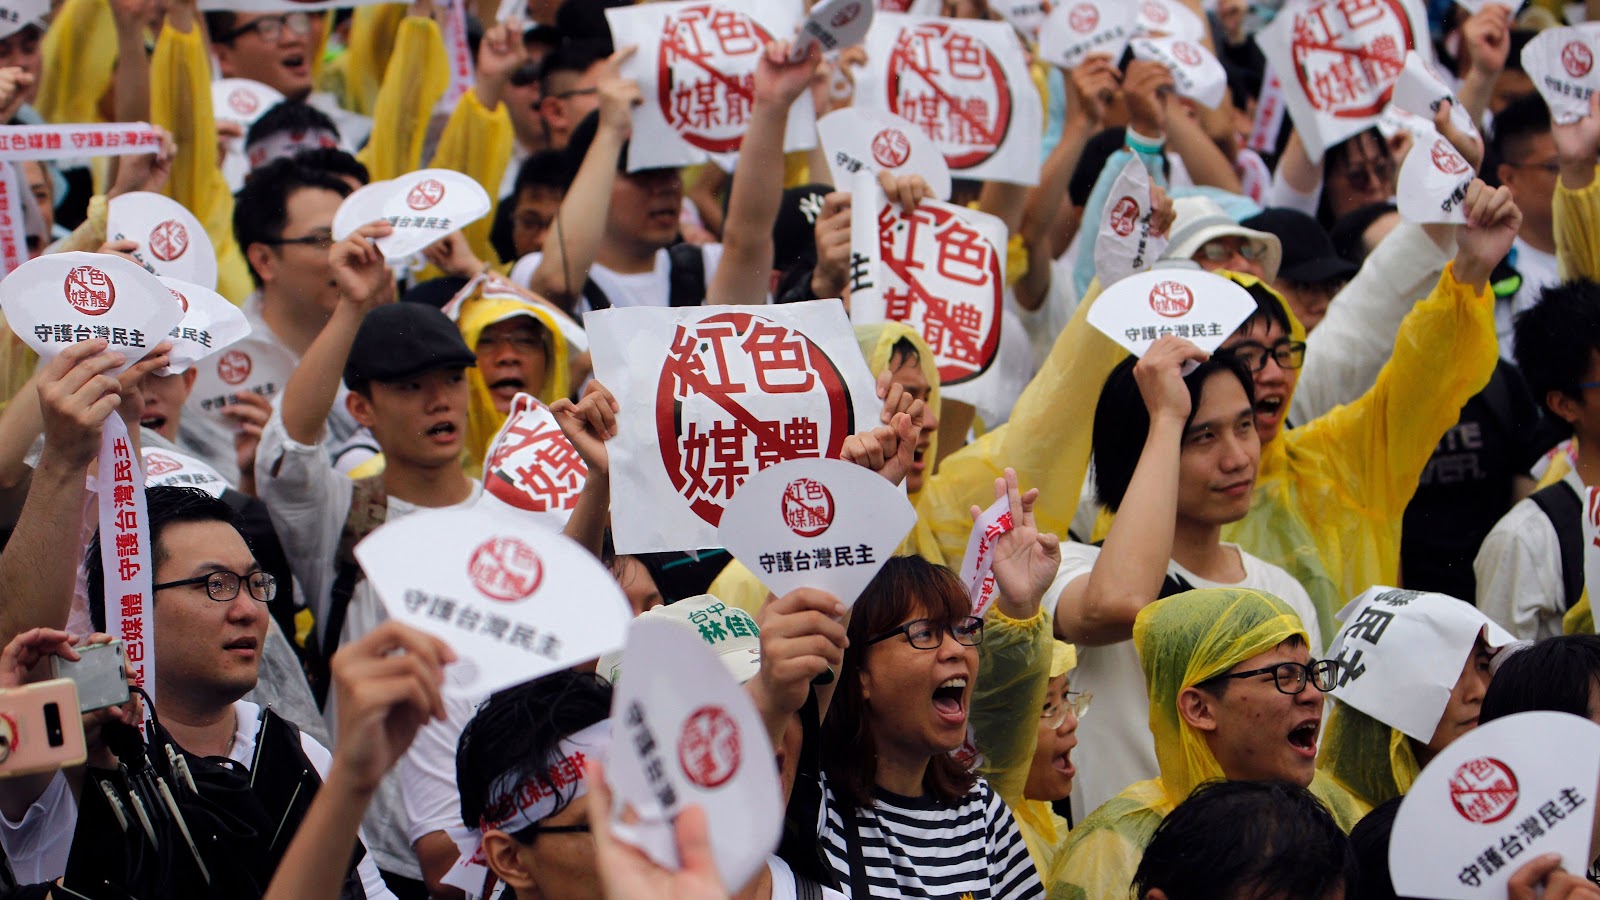 Demonstrators protest against what they call "red media" influence in Taiwan during a rally against pro-China media in front of the president's office building in Taipei on June 23.